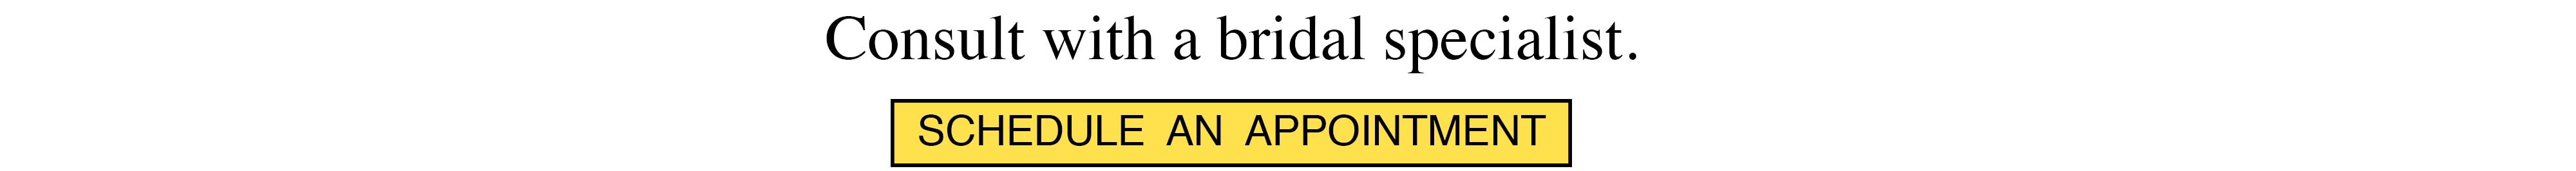 Schedule an appointment with the Manfredi Bridal Specialist.